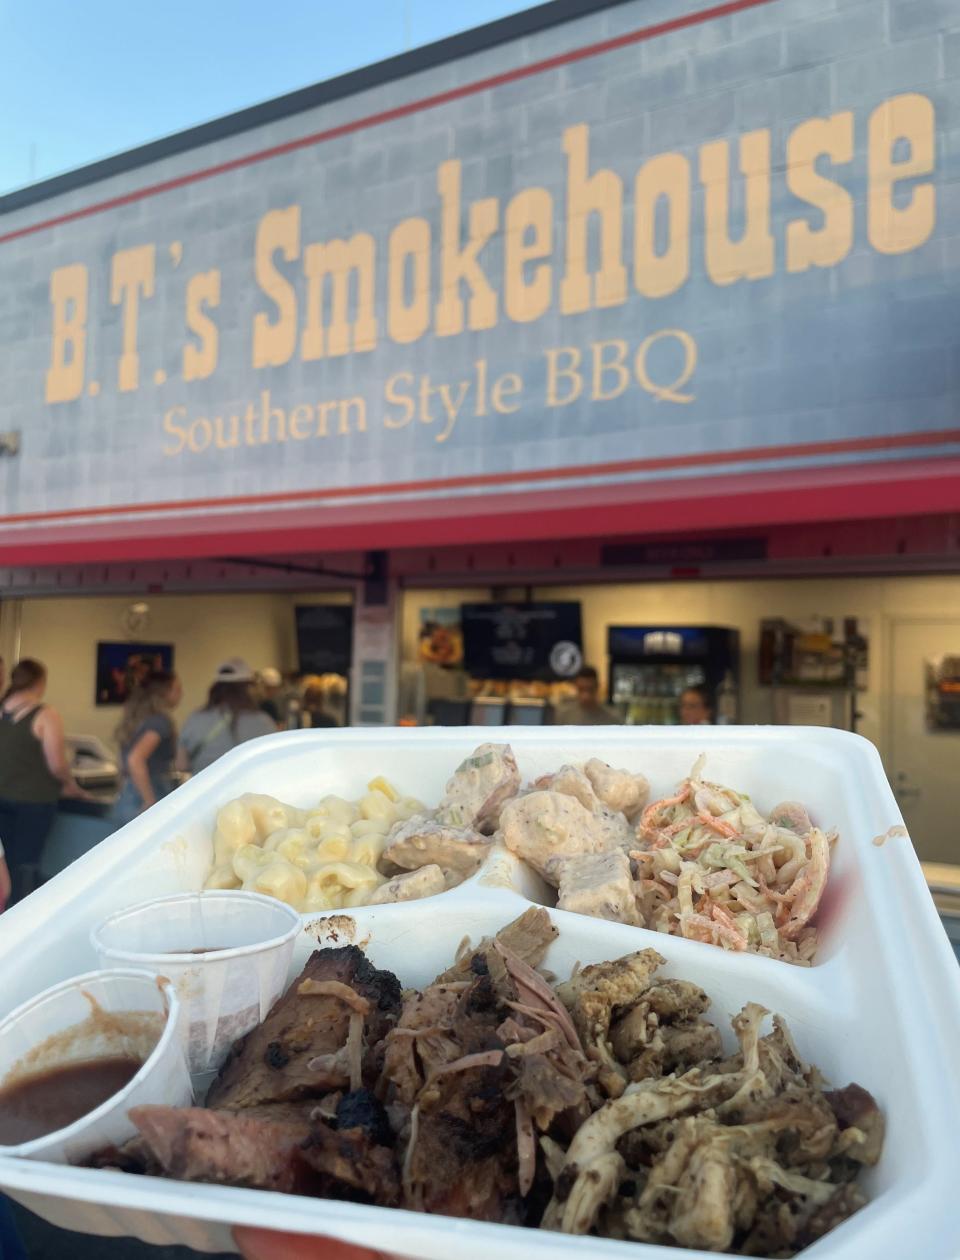 B.T.'s Smokehouse brings barbeque to Polar Park.